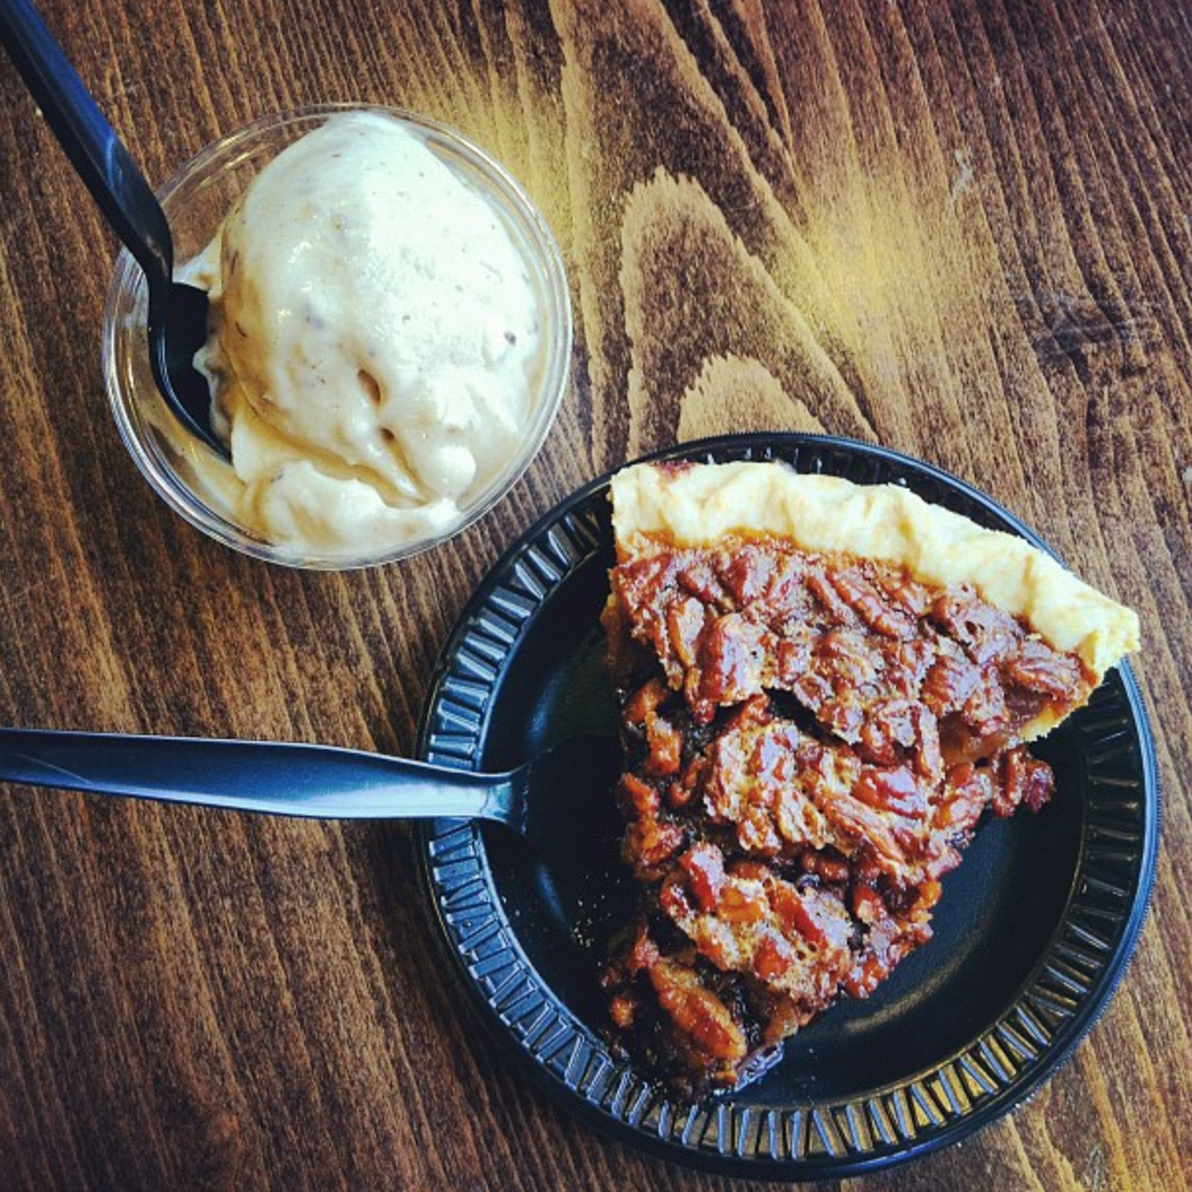 The Best Place To Get Pie In Every State, According To Yelp